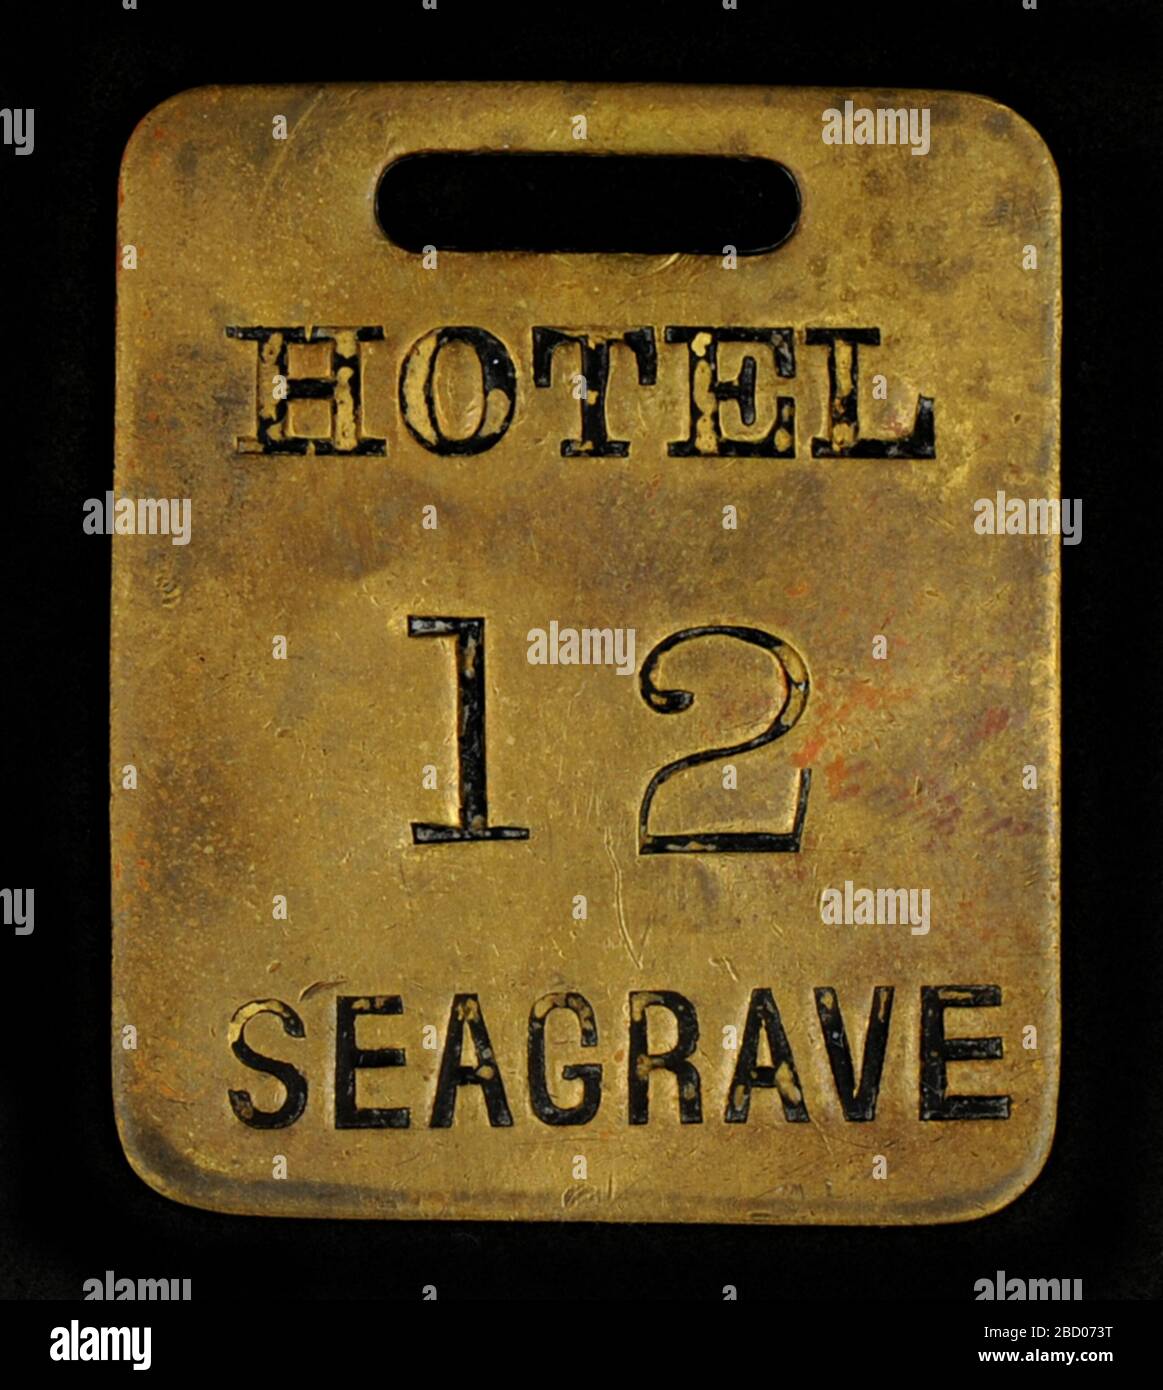 Hotel Seagrave Owney tag. Owney probably received this hotel key check token from Arthur A. Seagrave or one of his employees. Sometime in 1889-1890, Seagrave built a hotel on the corner of Virginia and 3rd Avenue in Seattle, Washington, naming it after himself. Hotel Seagrave Owney tag Stock Photo